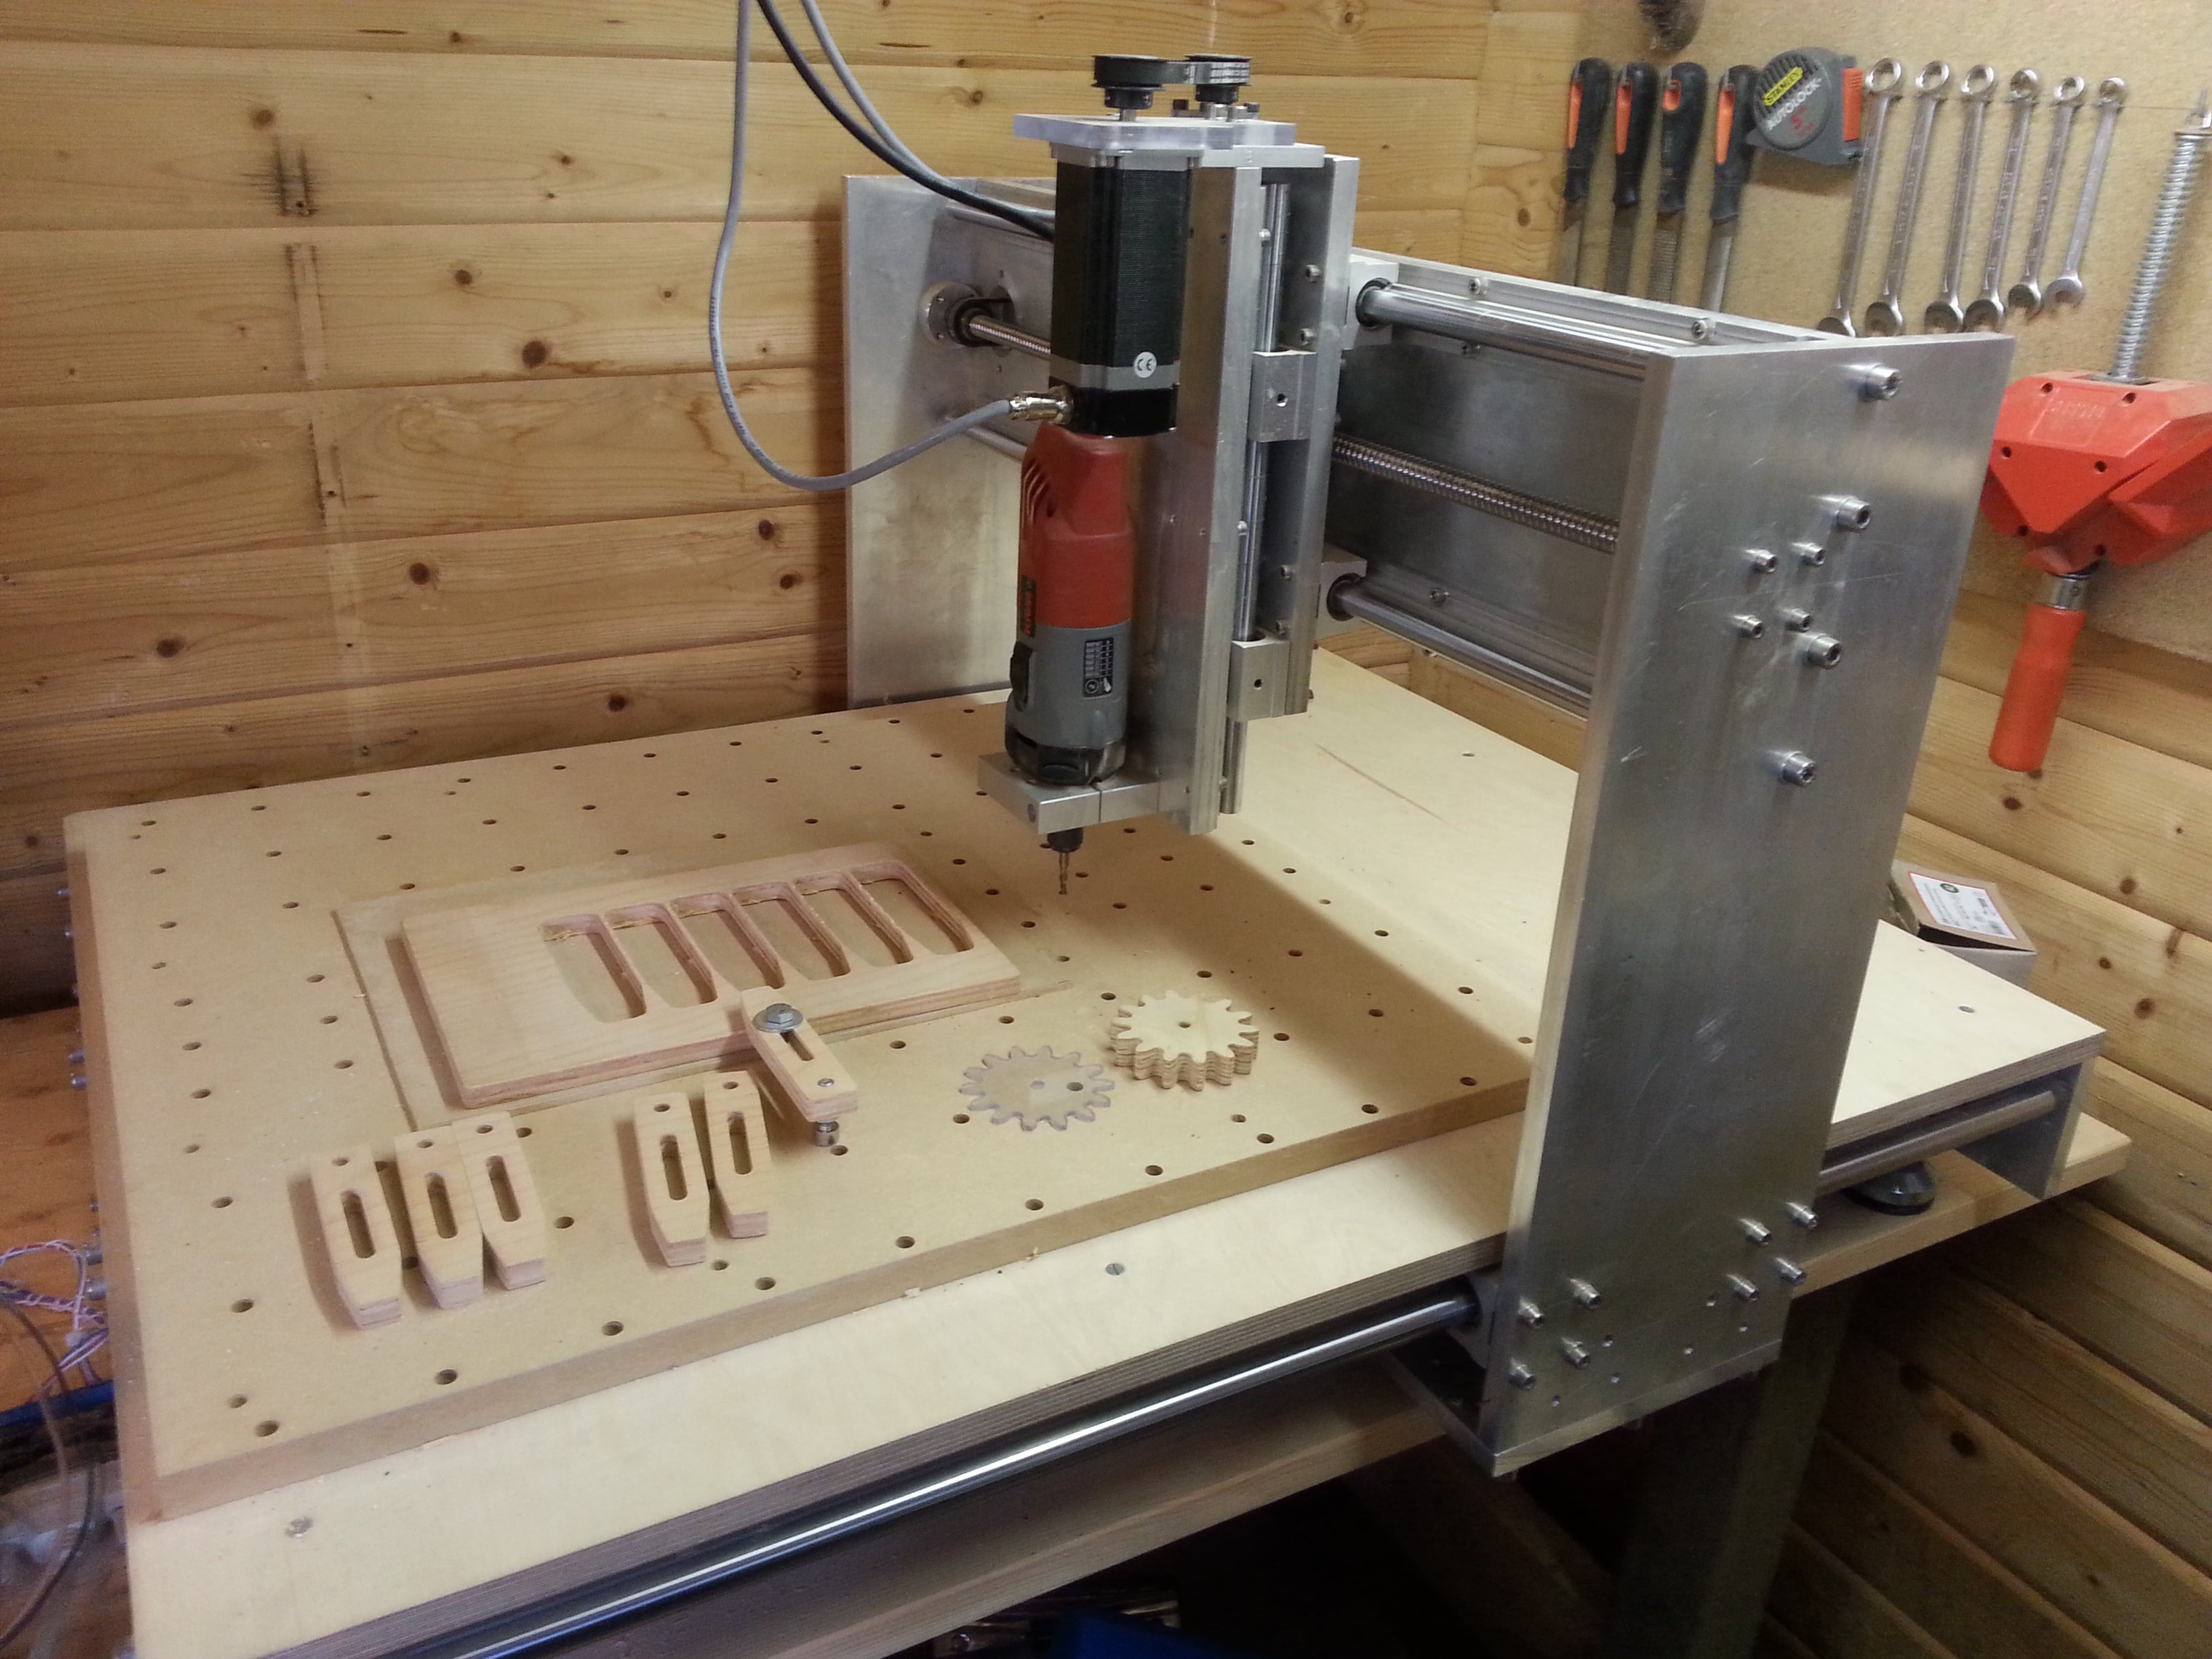 DIY CNC Router: How to Build Your Own